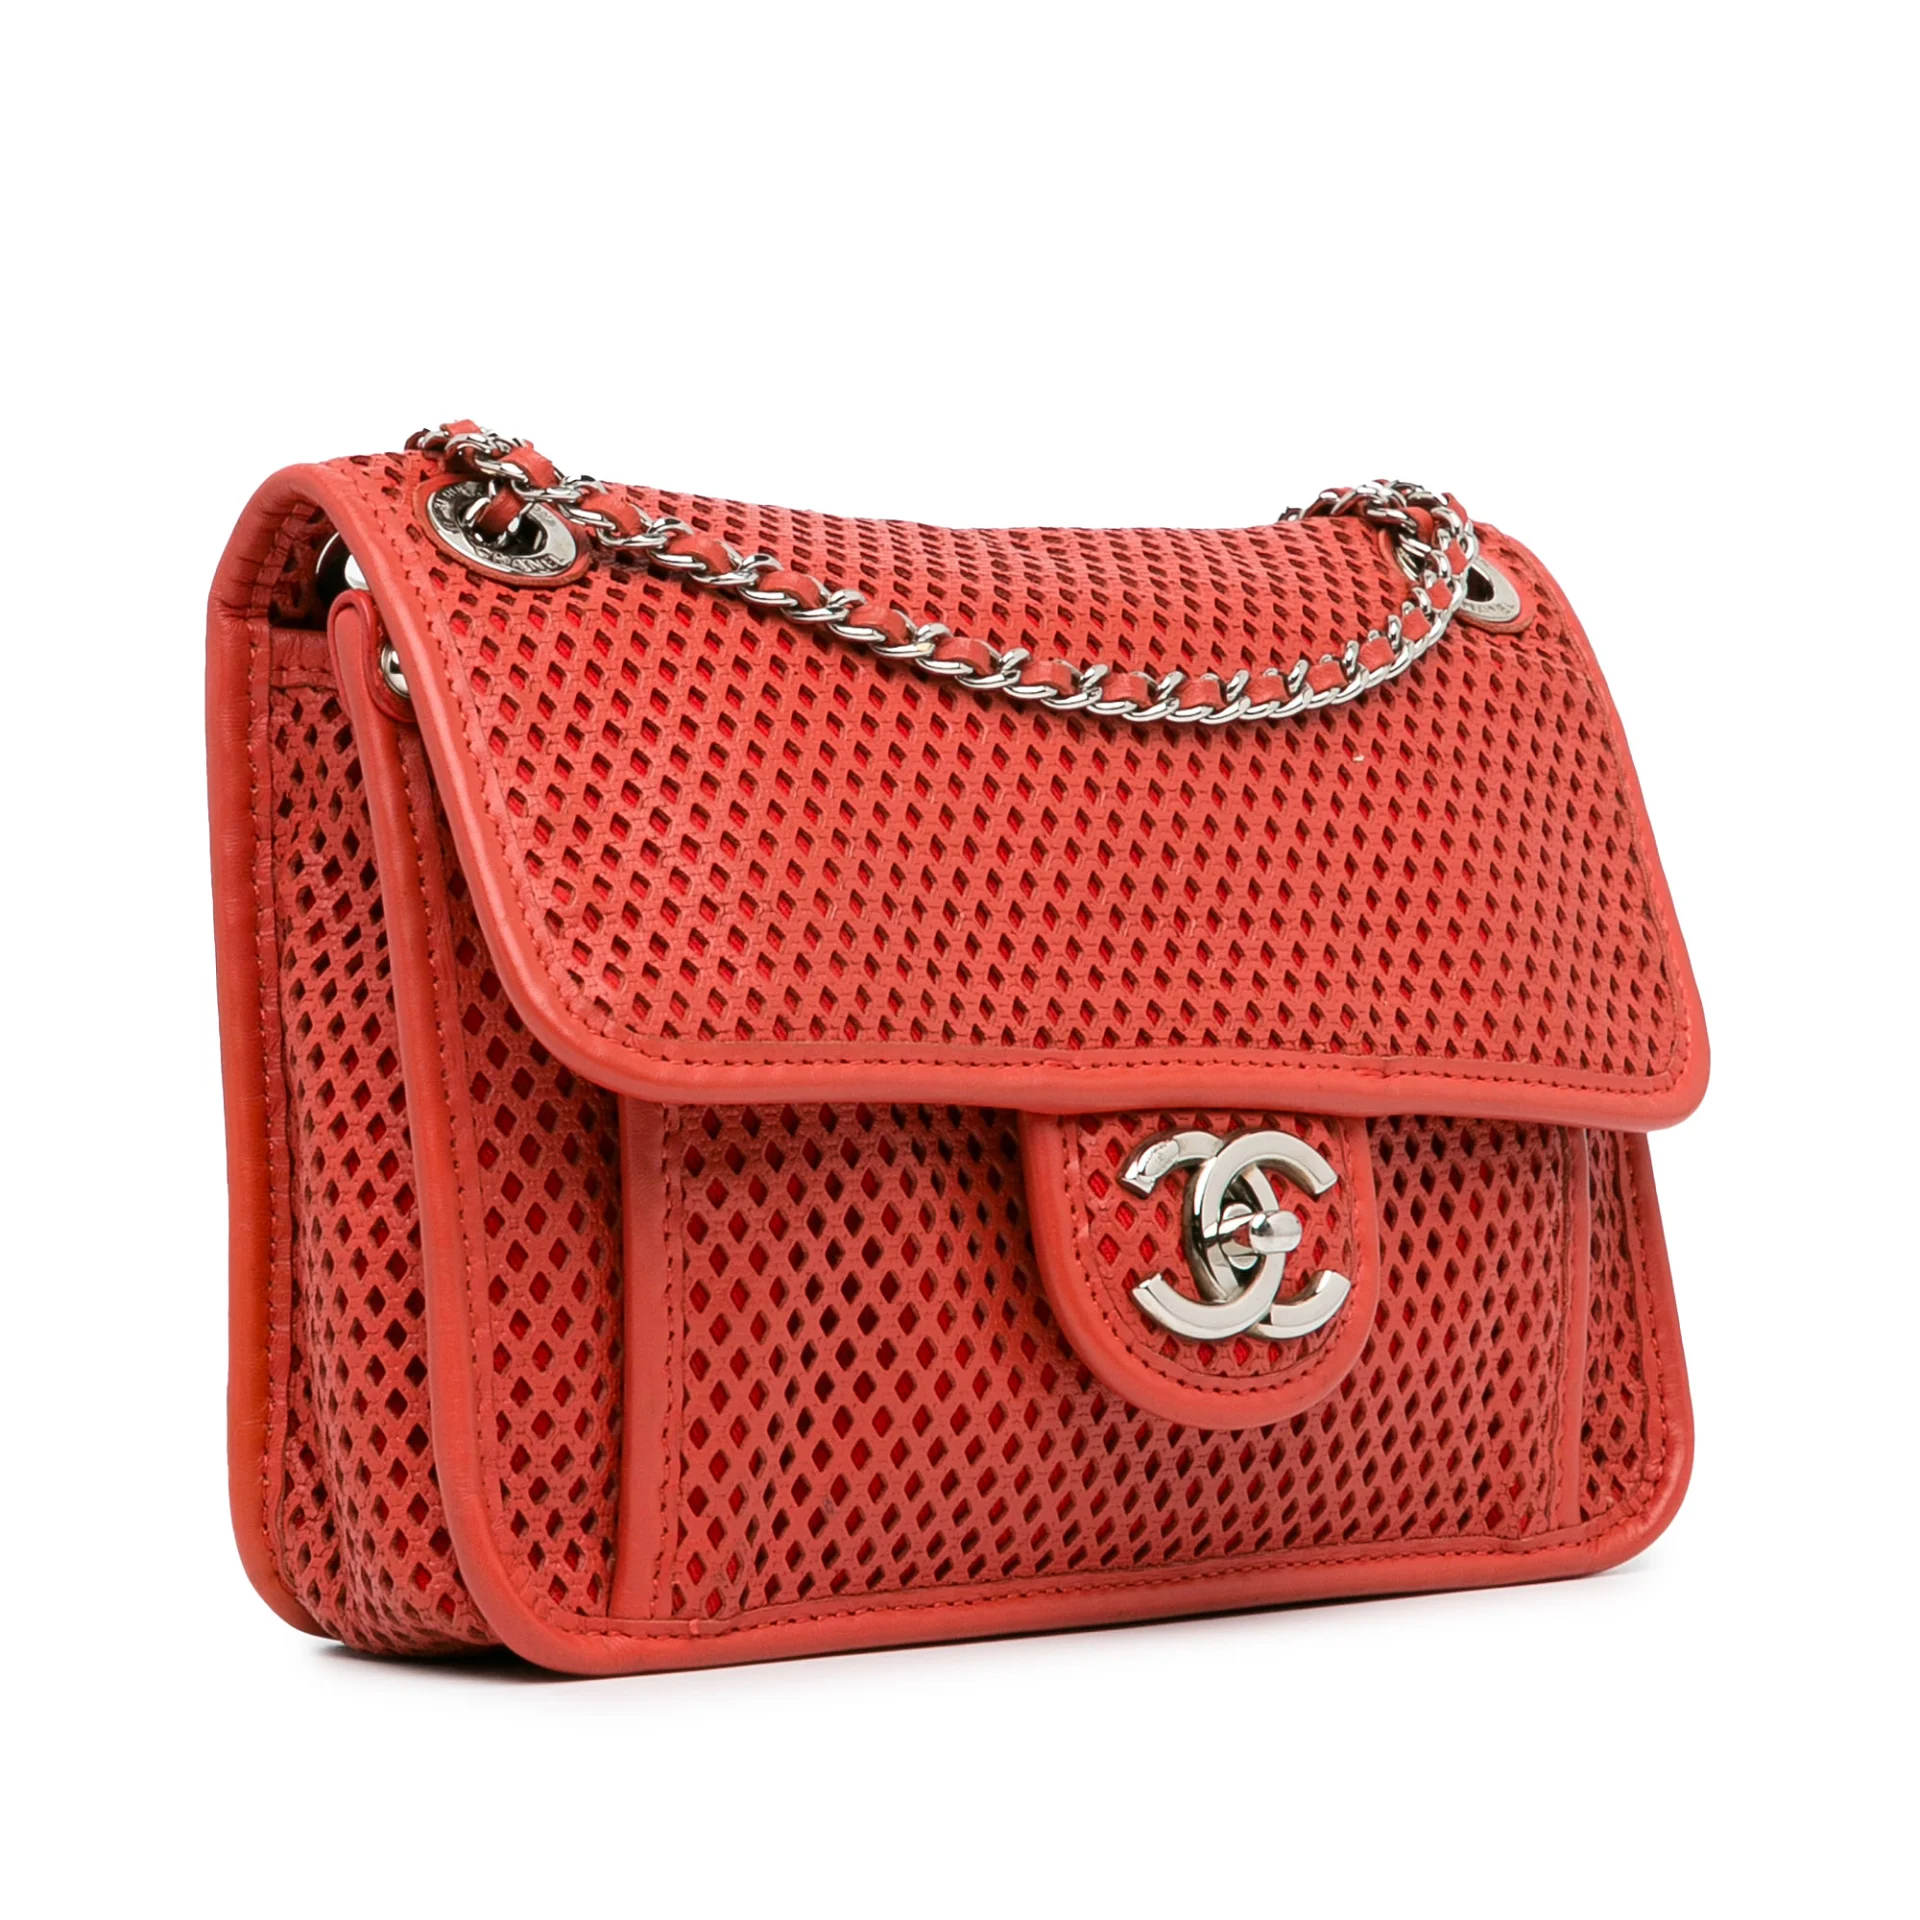 Chanel Small Perforated Calfskin Up In The Air Flap